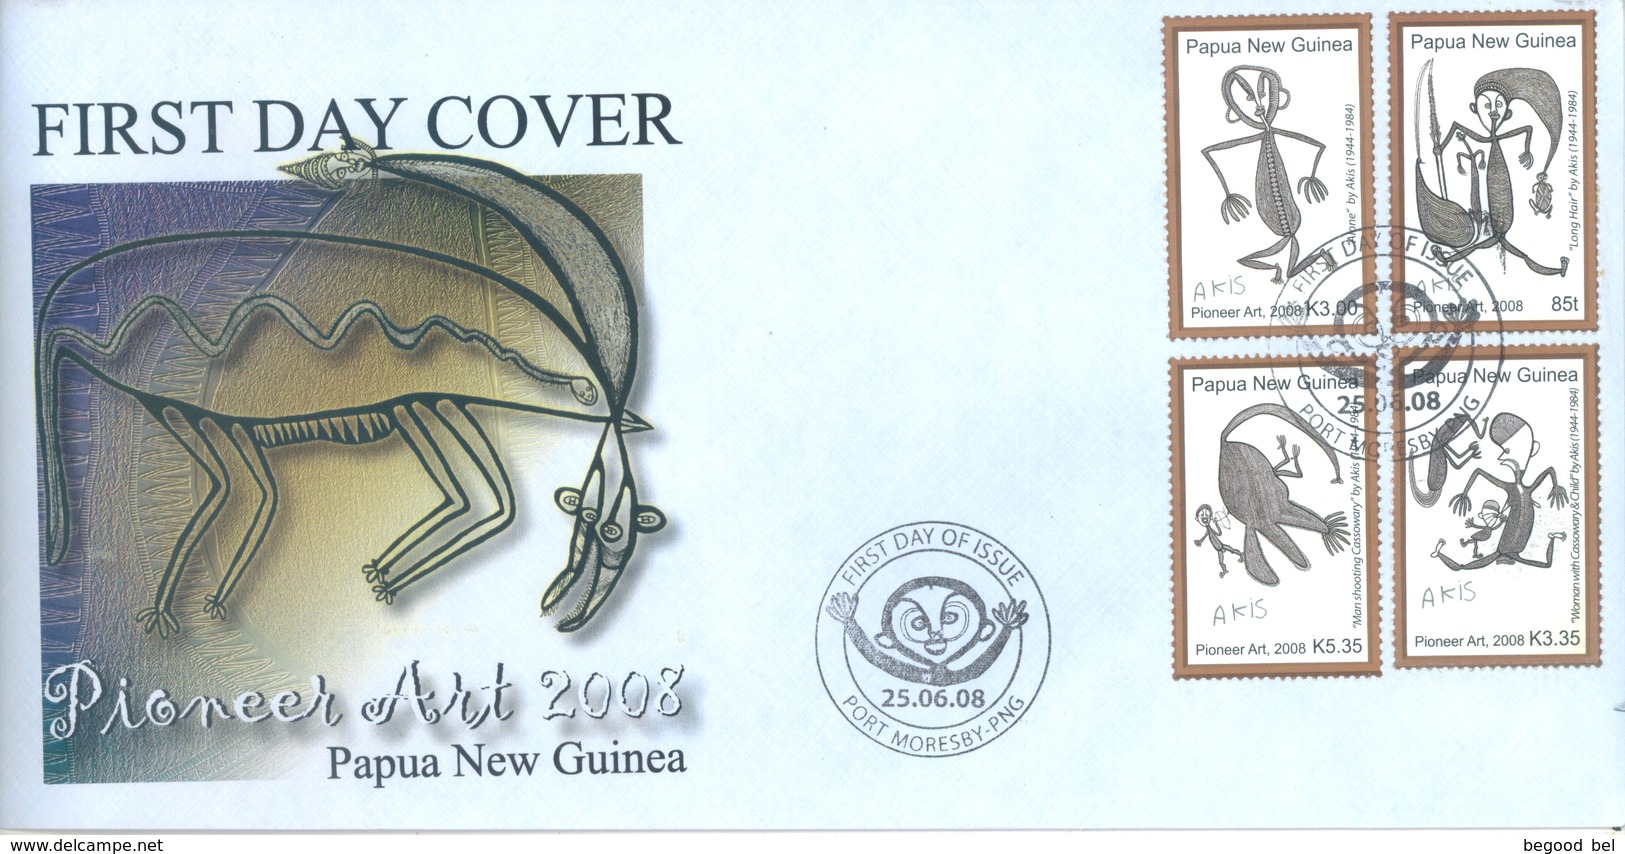 PAPUA NEW GUINEA - FDC  - 25.6.2008 - PIONEER ART - Yv 1219-1222 -  Lot 17680 - Papouasie-Nouvelle-Guinée